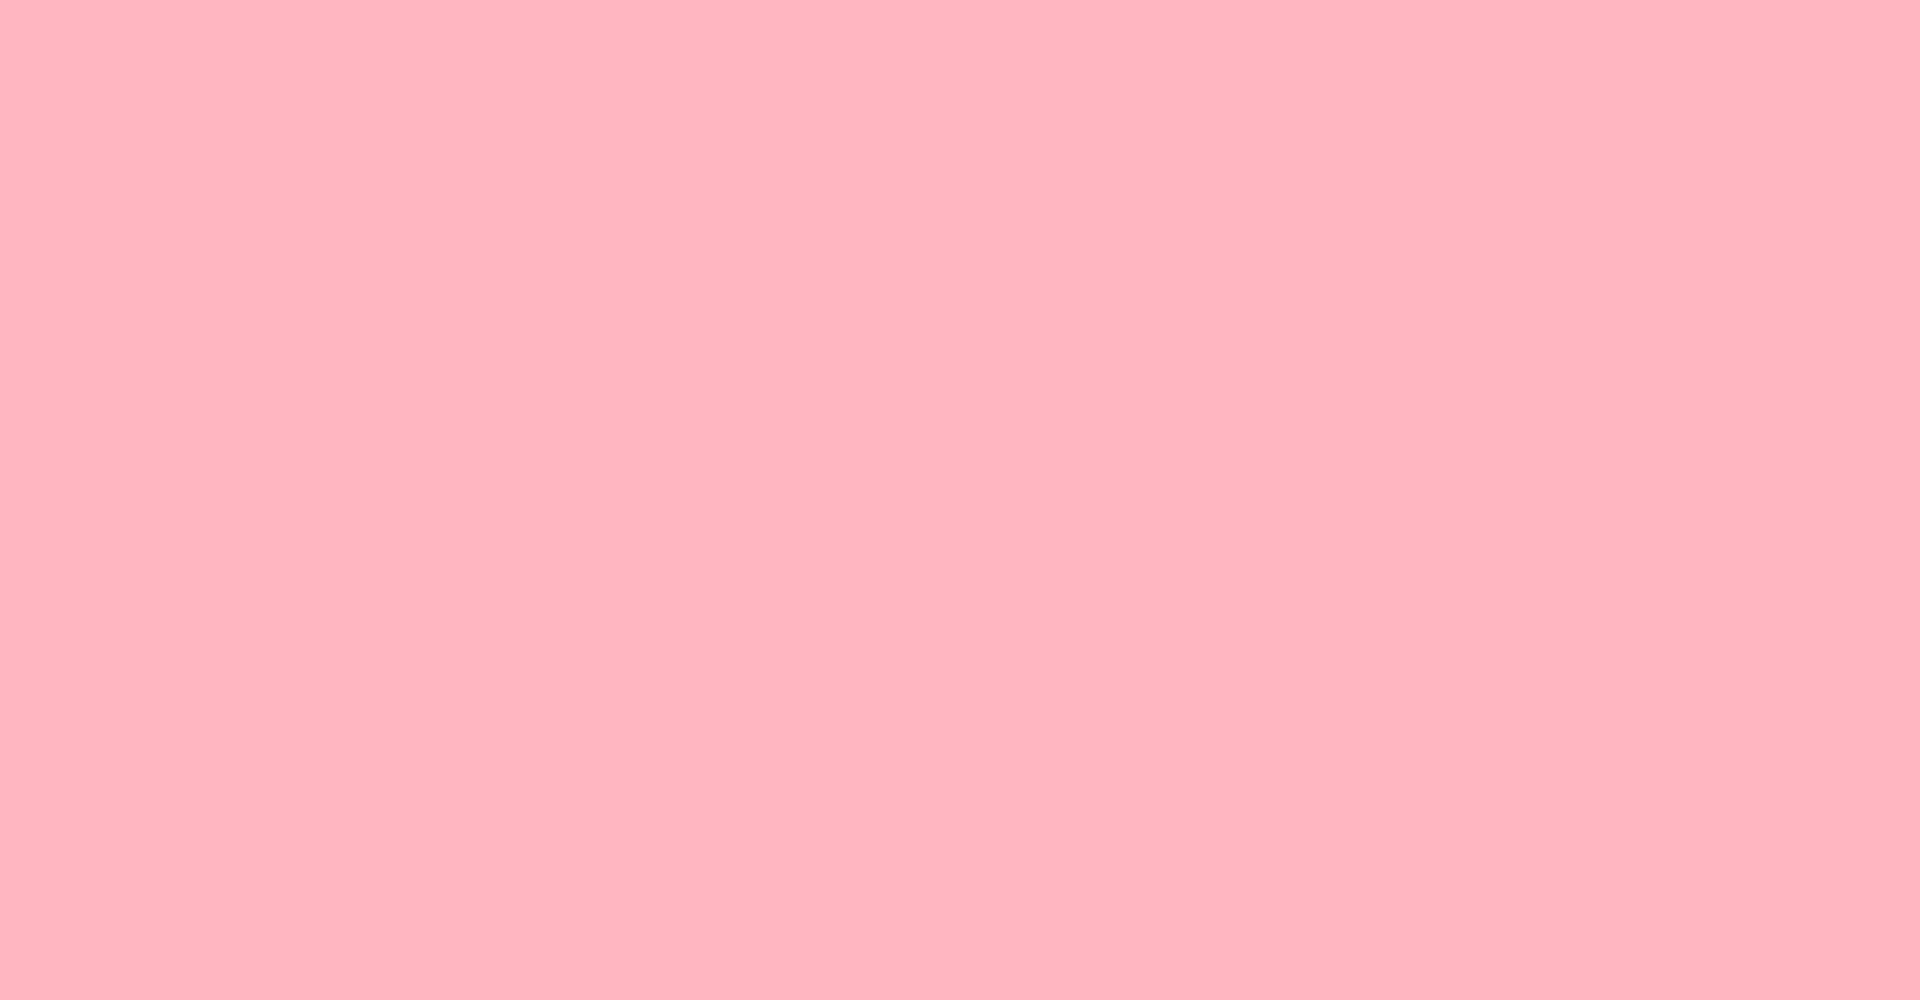 Understanding The Color Theory Behind Pink and Its Uses | Simplified